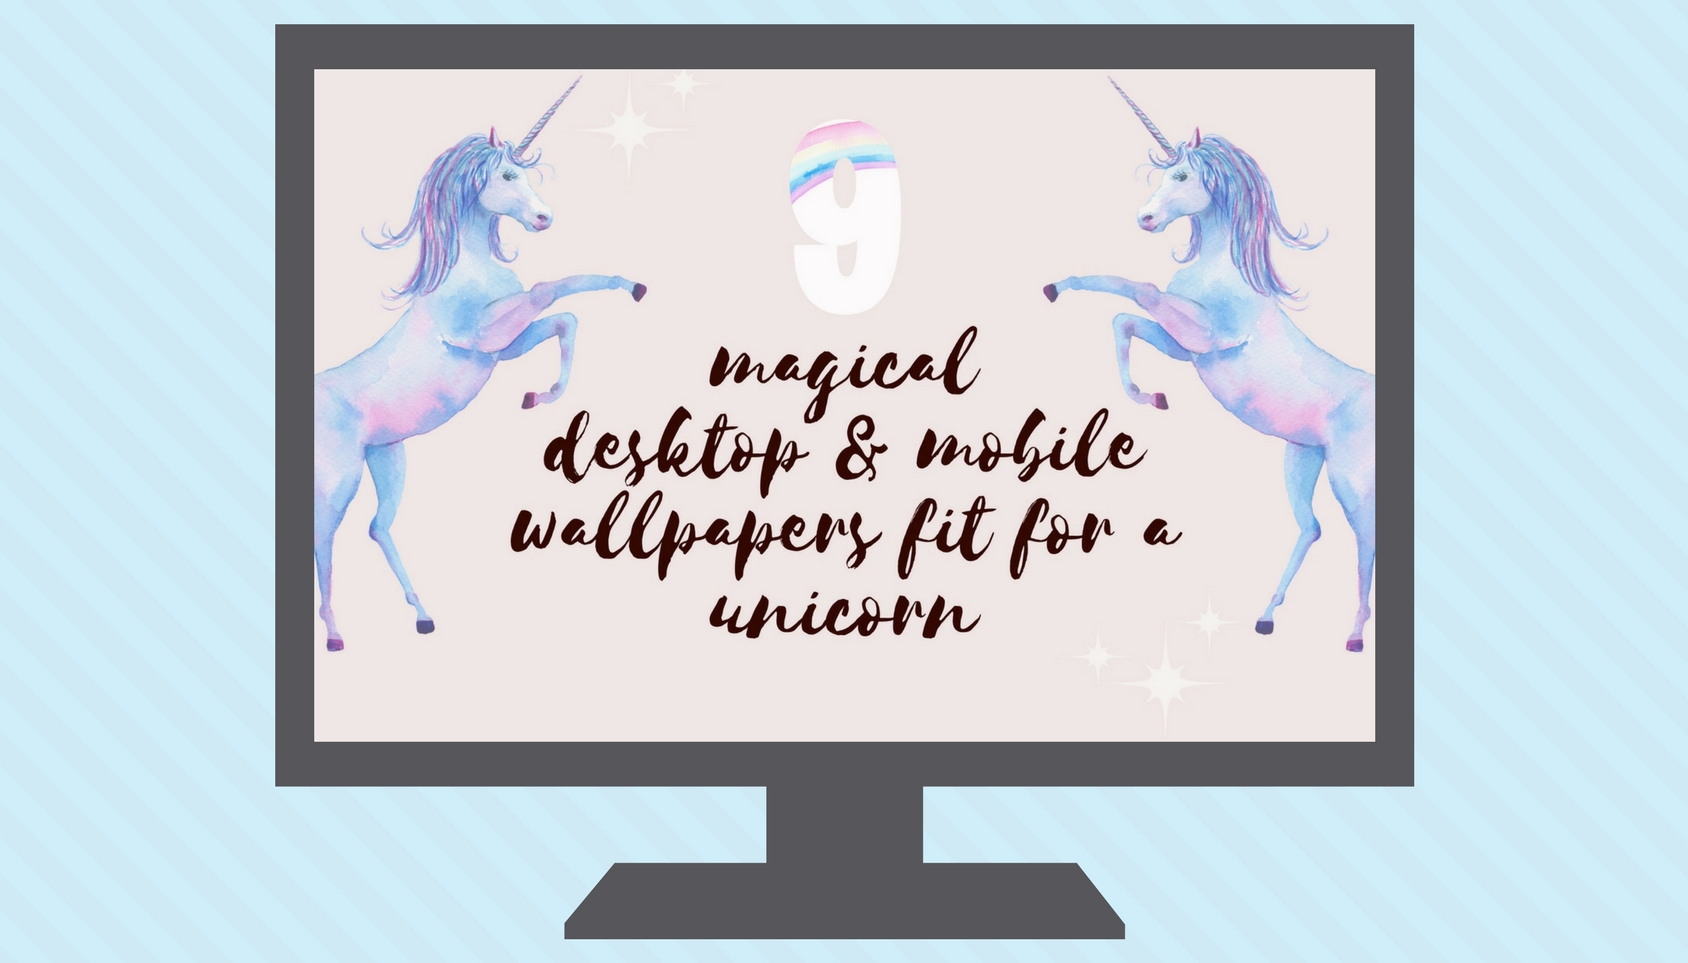 9 Magical Desktop And Mobile Wallpapers Fit For A Unicorn - Stallion , HD Wallpaper & Backgrounds